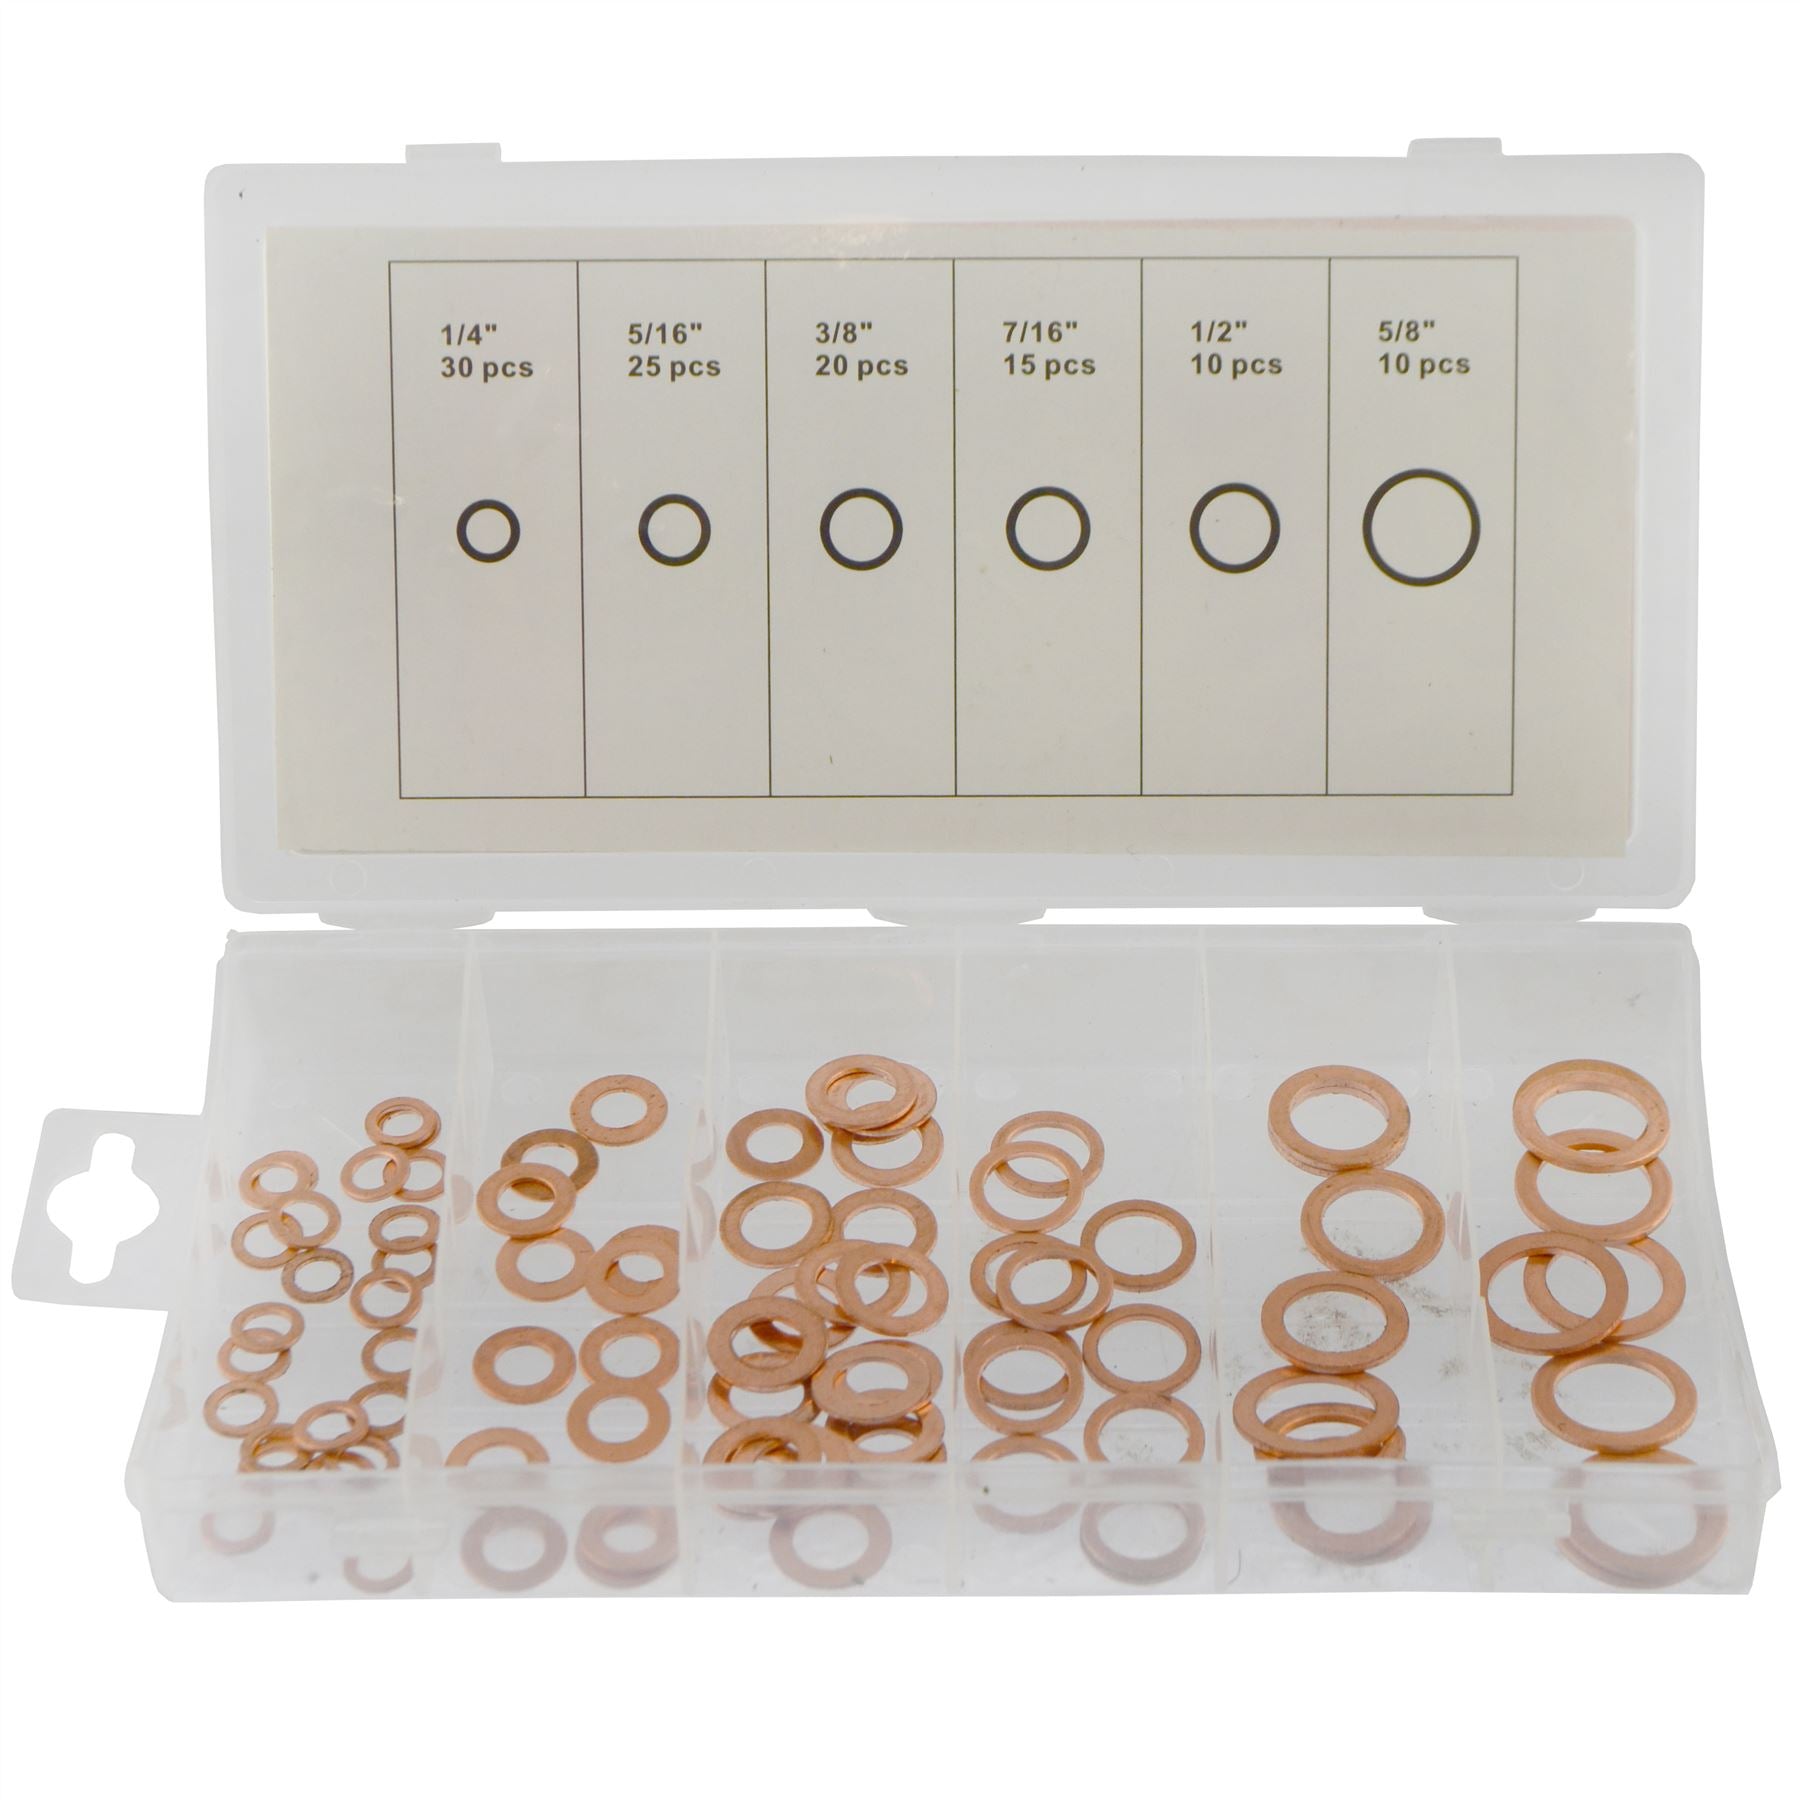 110pc Solid Copper Washer Kit Assortment 1/4" - 5/8"  Imperial Sizes